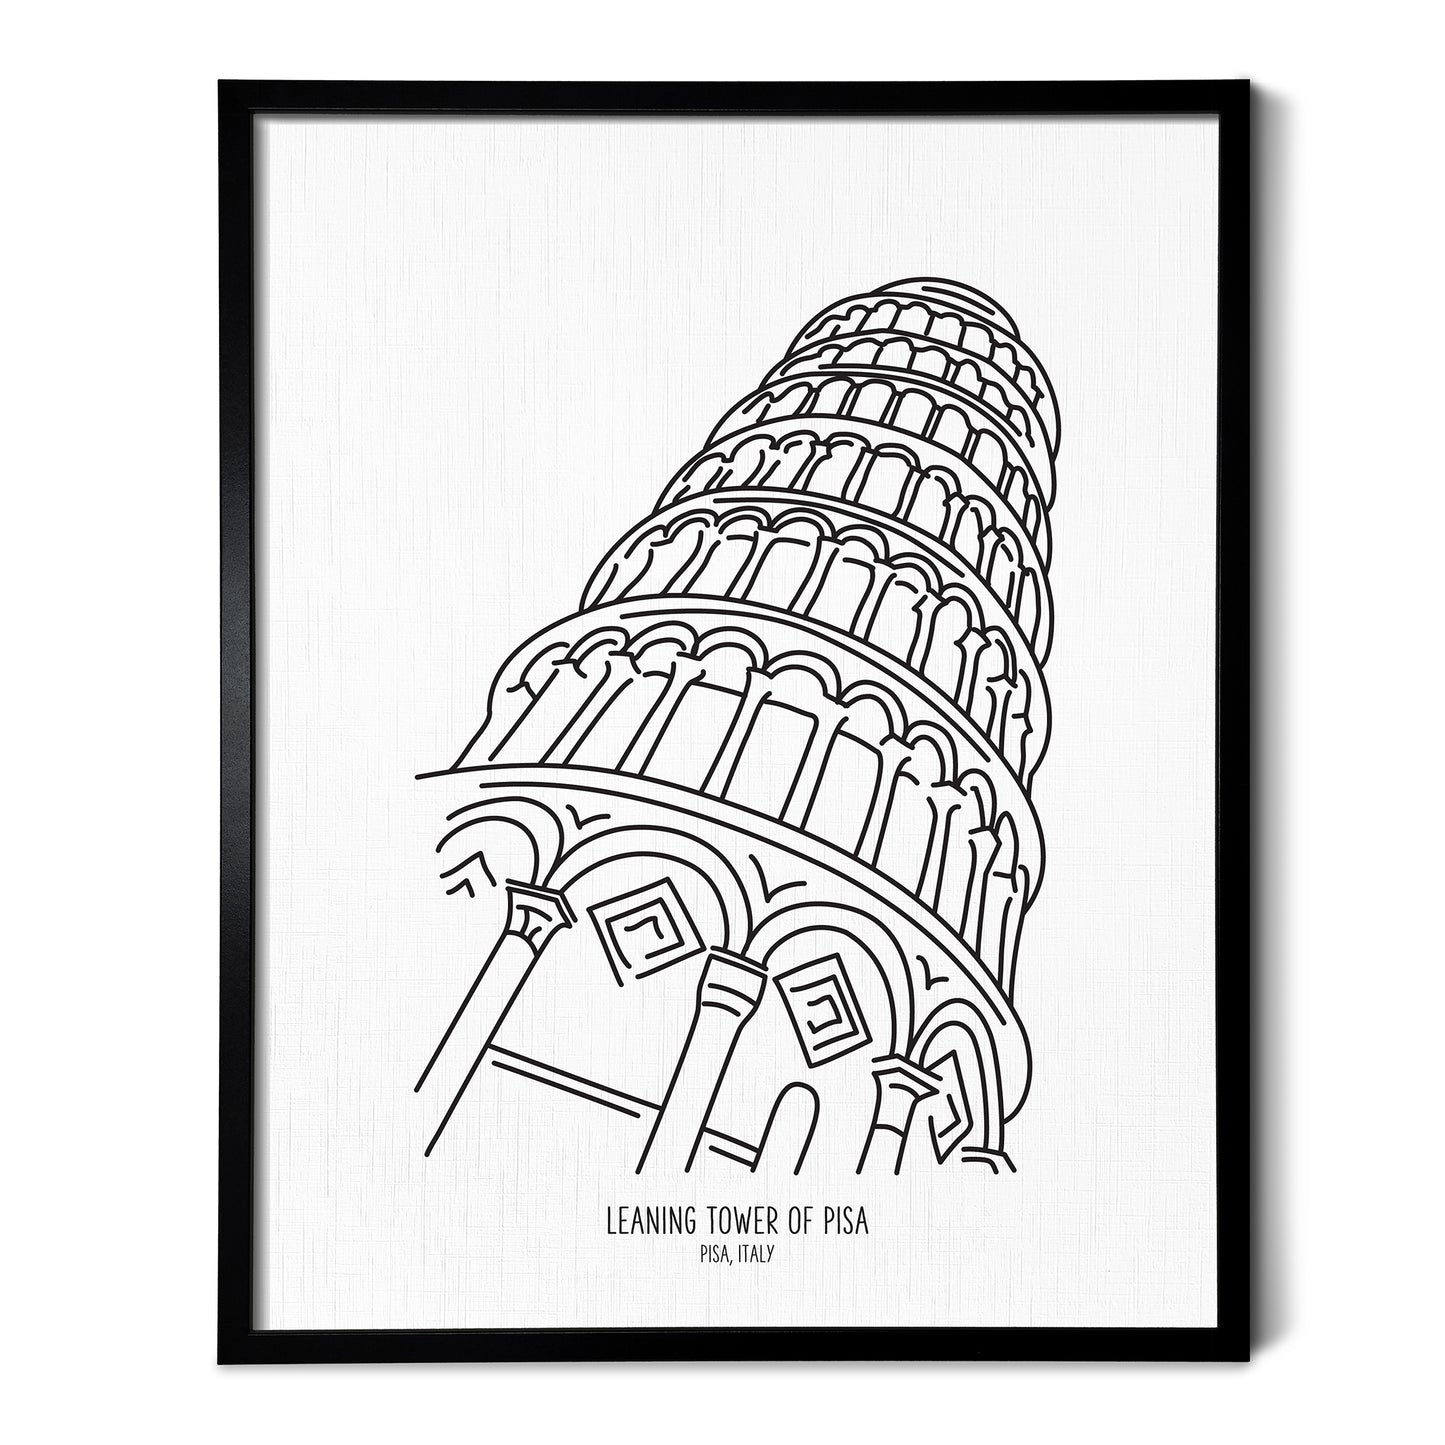 Custom line art drawings of the Leaning Tower of Pisa in Italy on white linen paper in a thin black picture frames